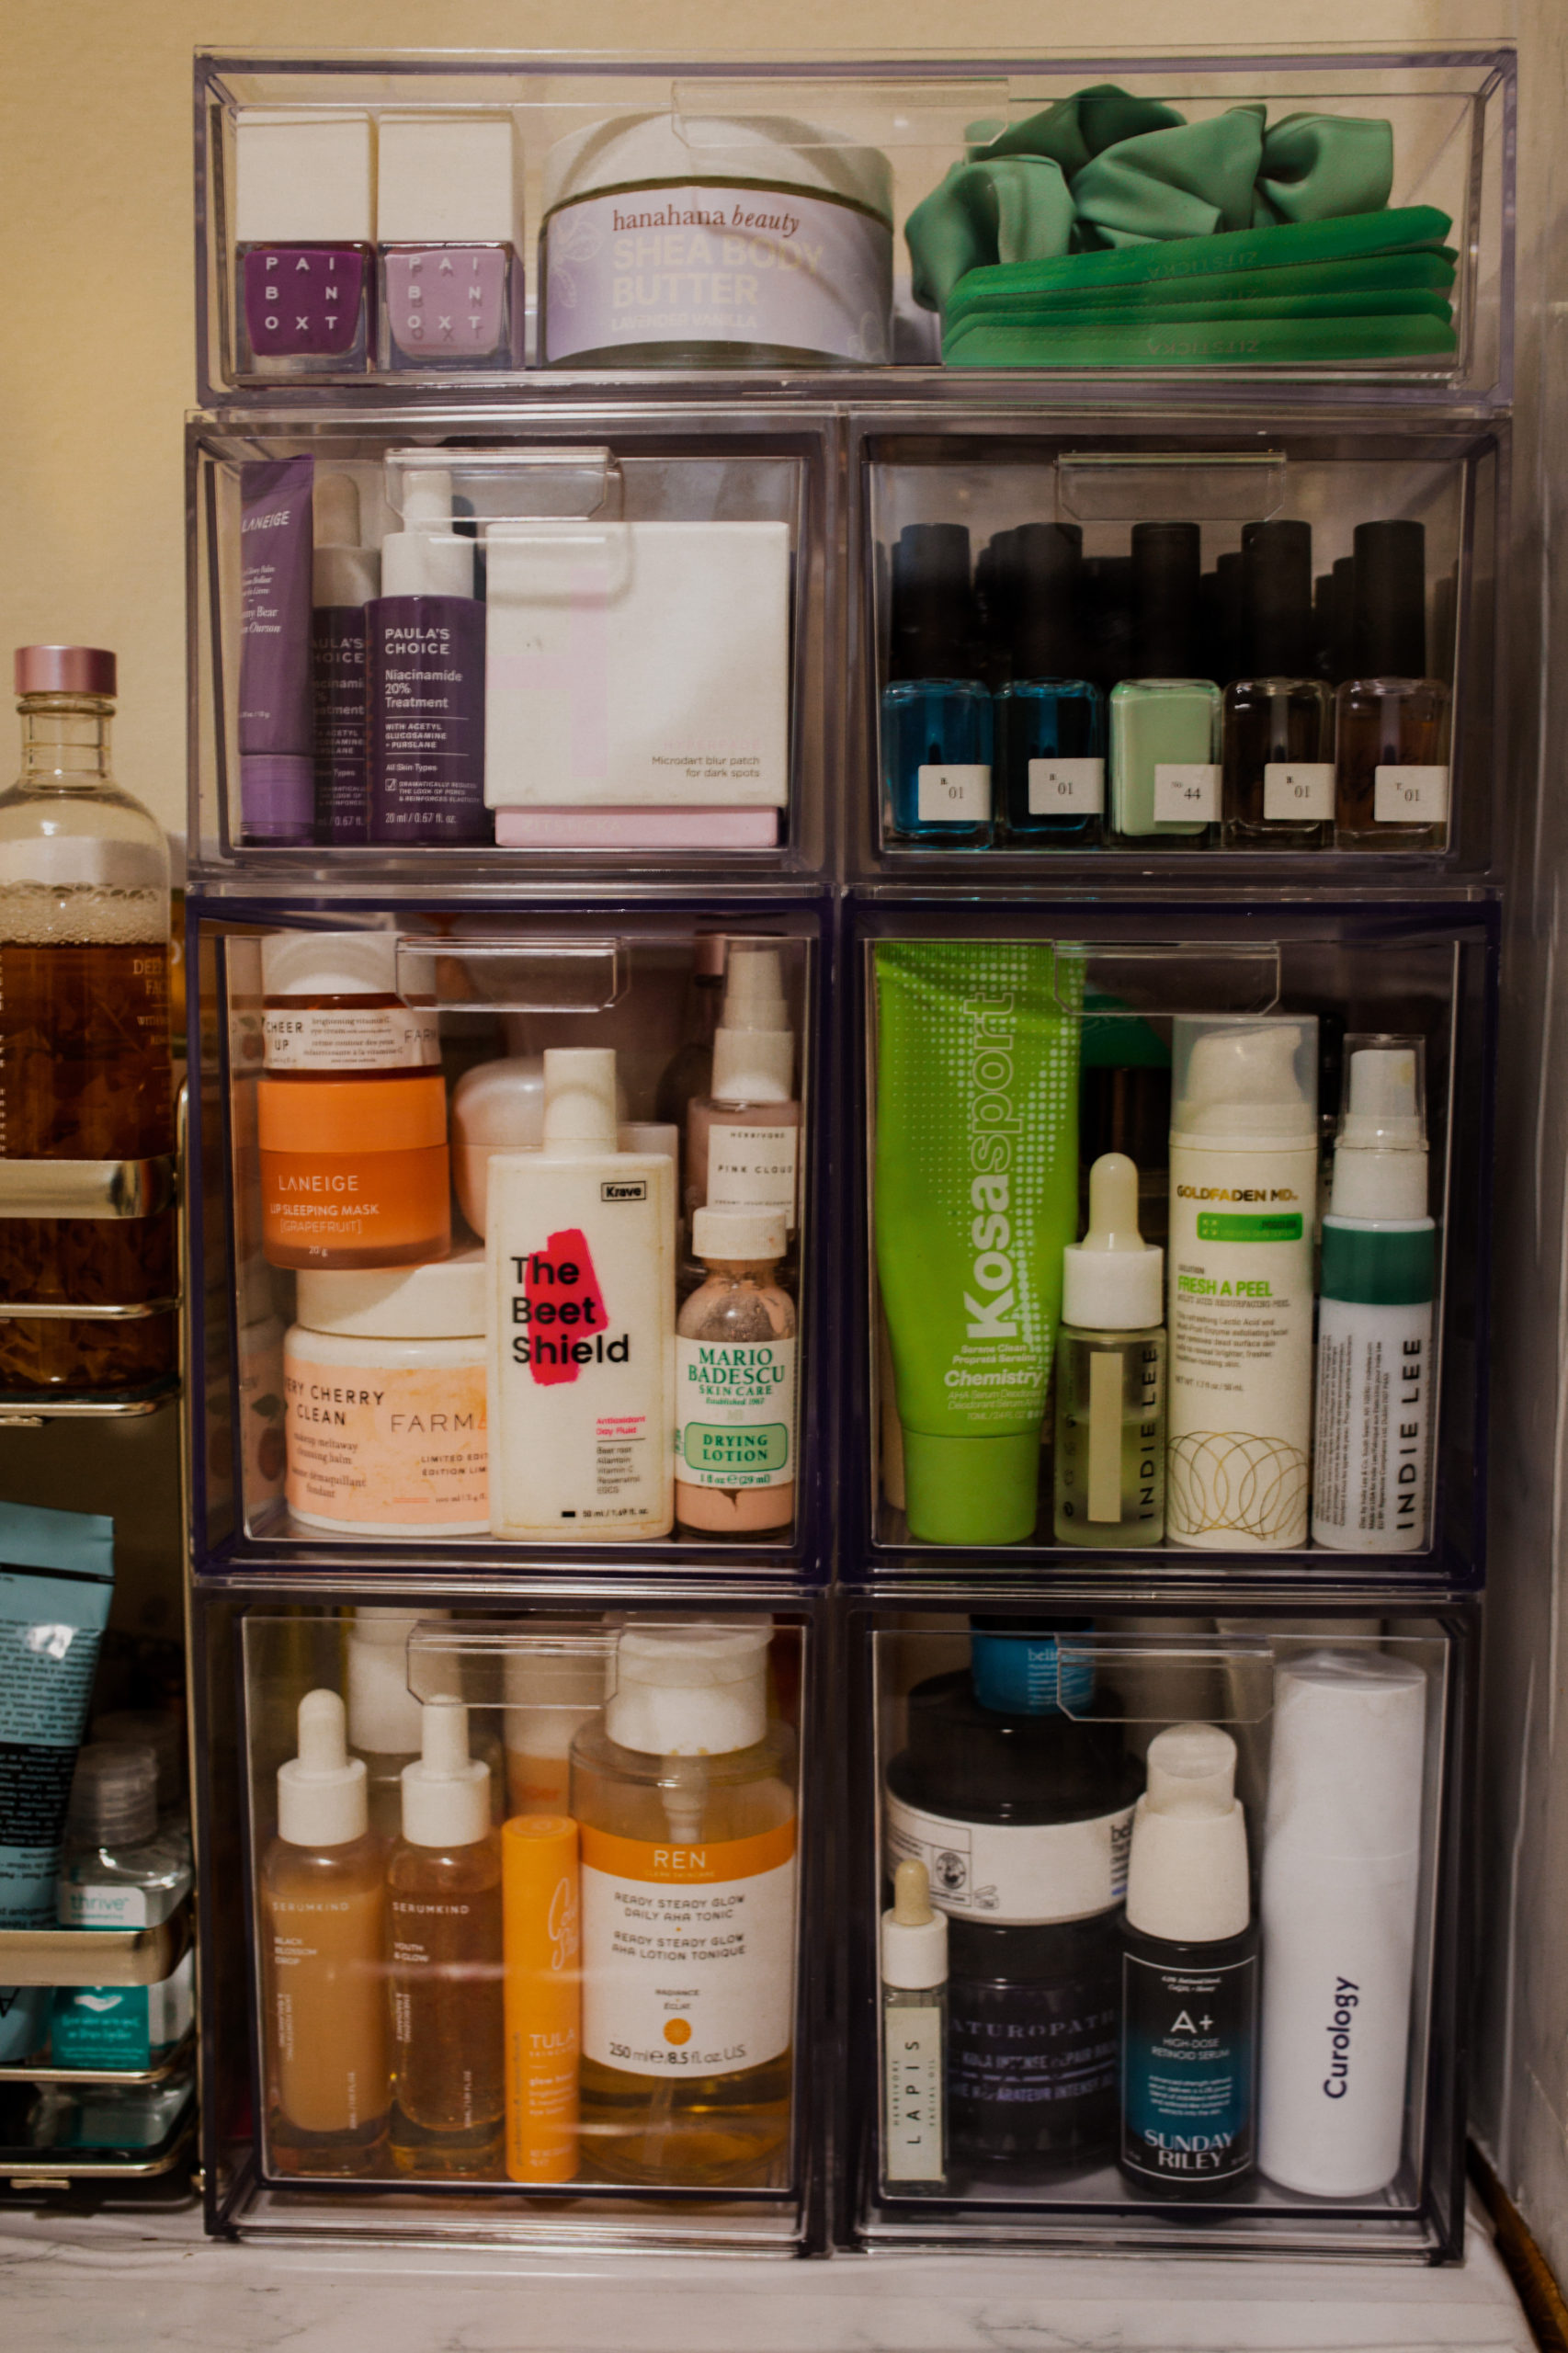 really taking my skincare organization up a notch here! #organizewithm, skincare organization